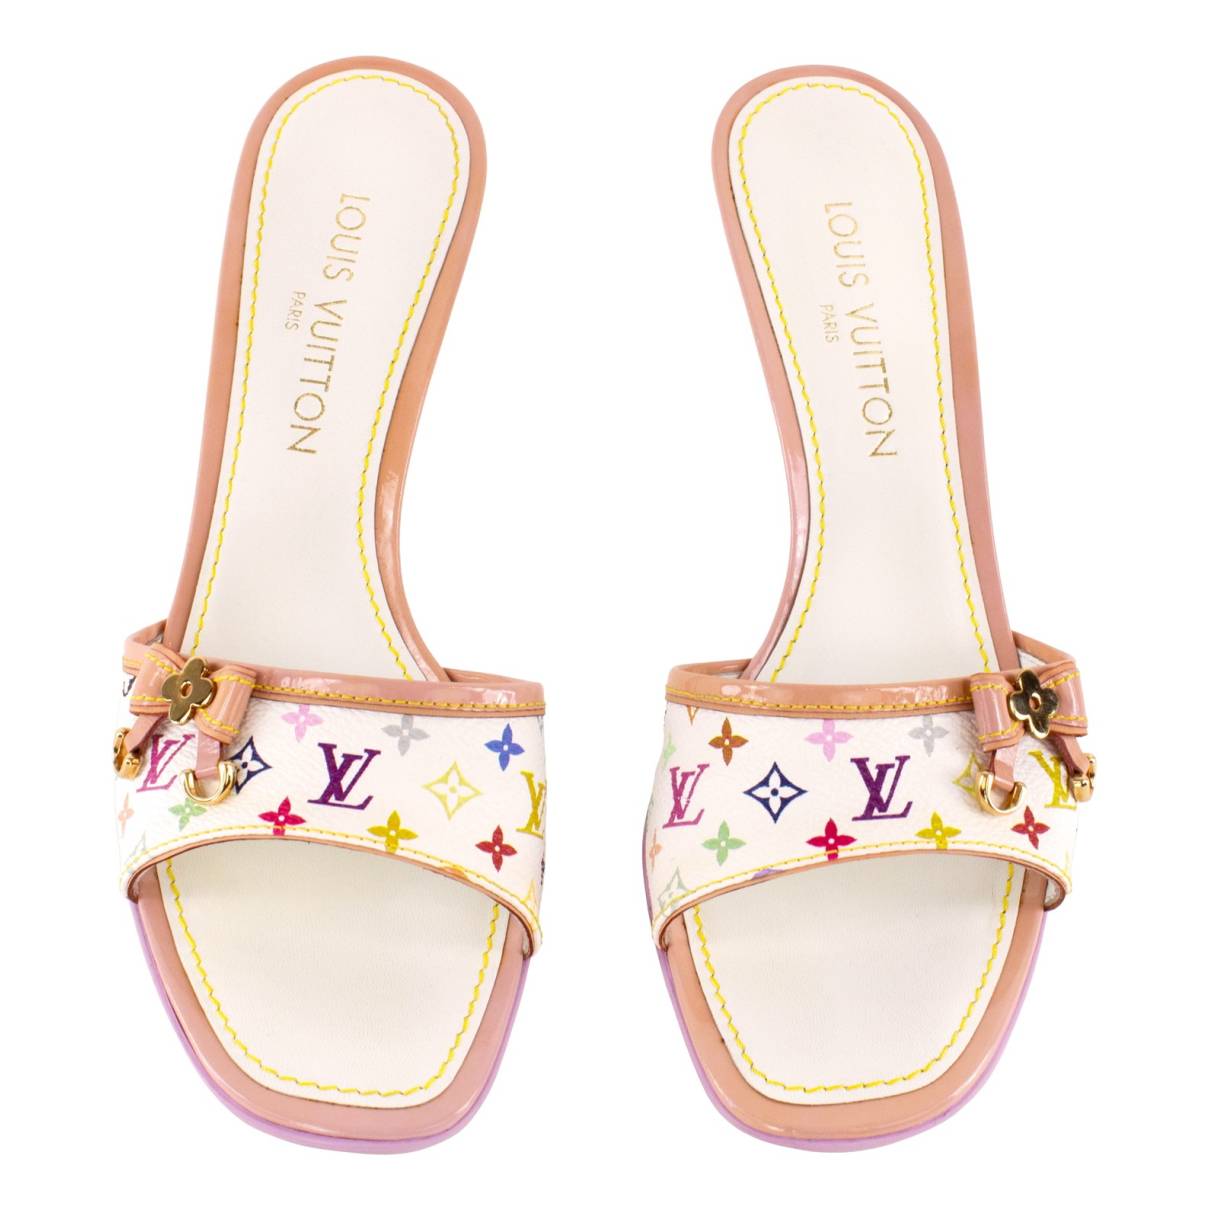 Louis Vuitton Murakami Multicolor Wedge Shoes  Louis vuitton murakami,  Louis vuitton shoes heels, Lace up wedge sandals